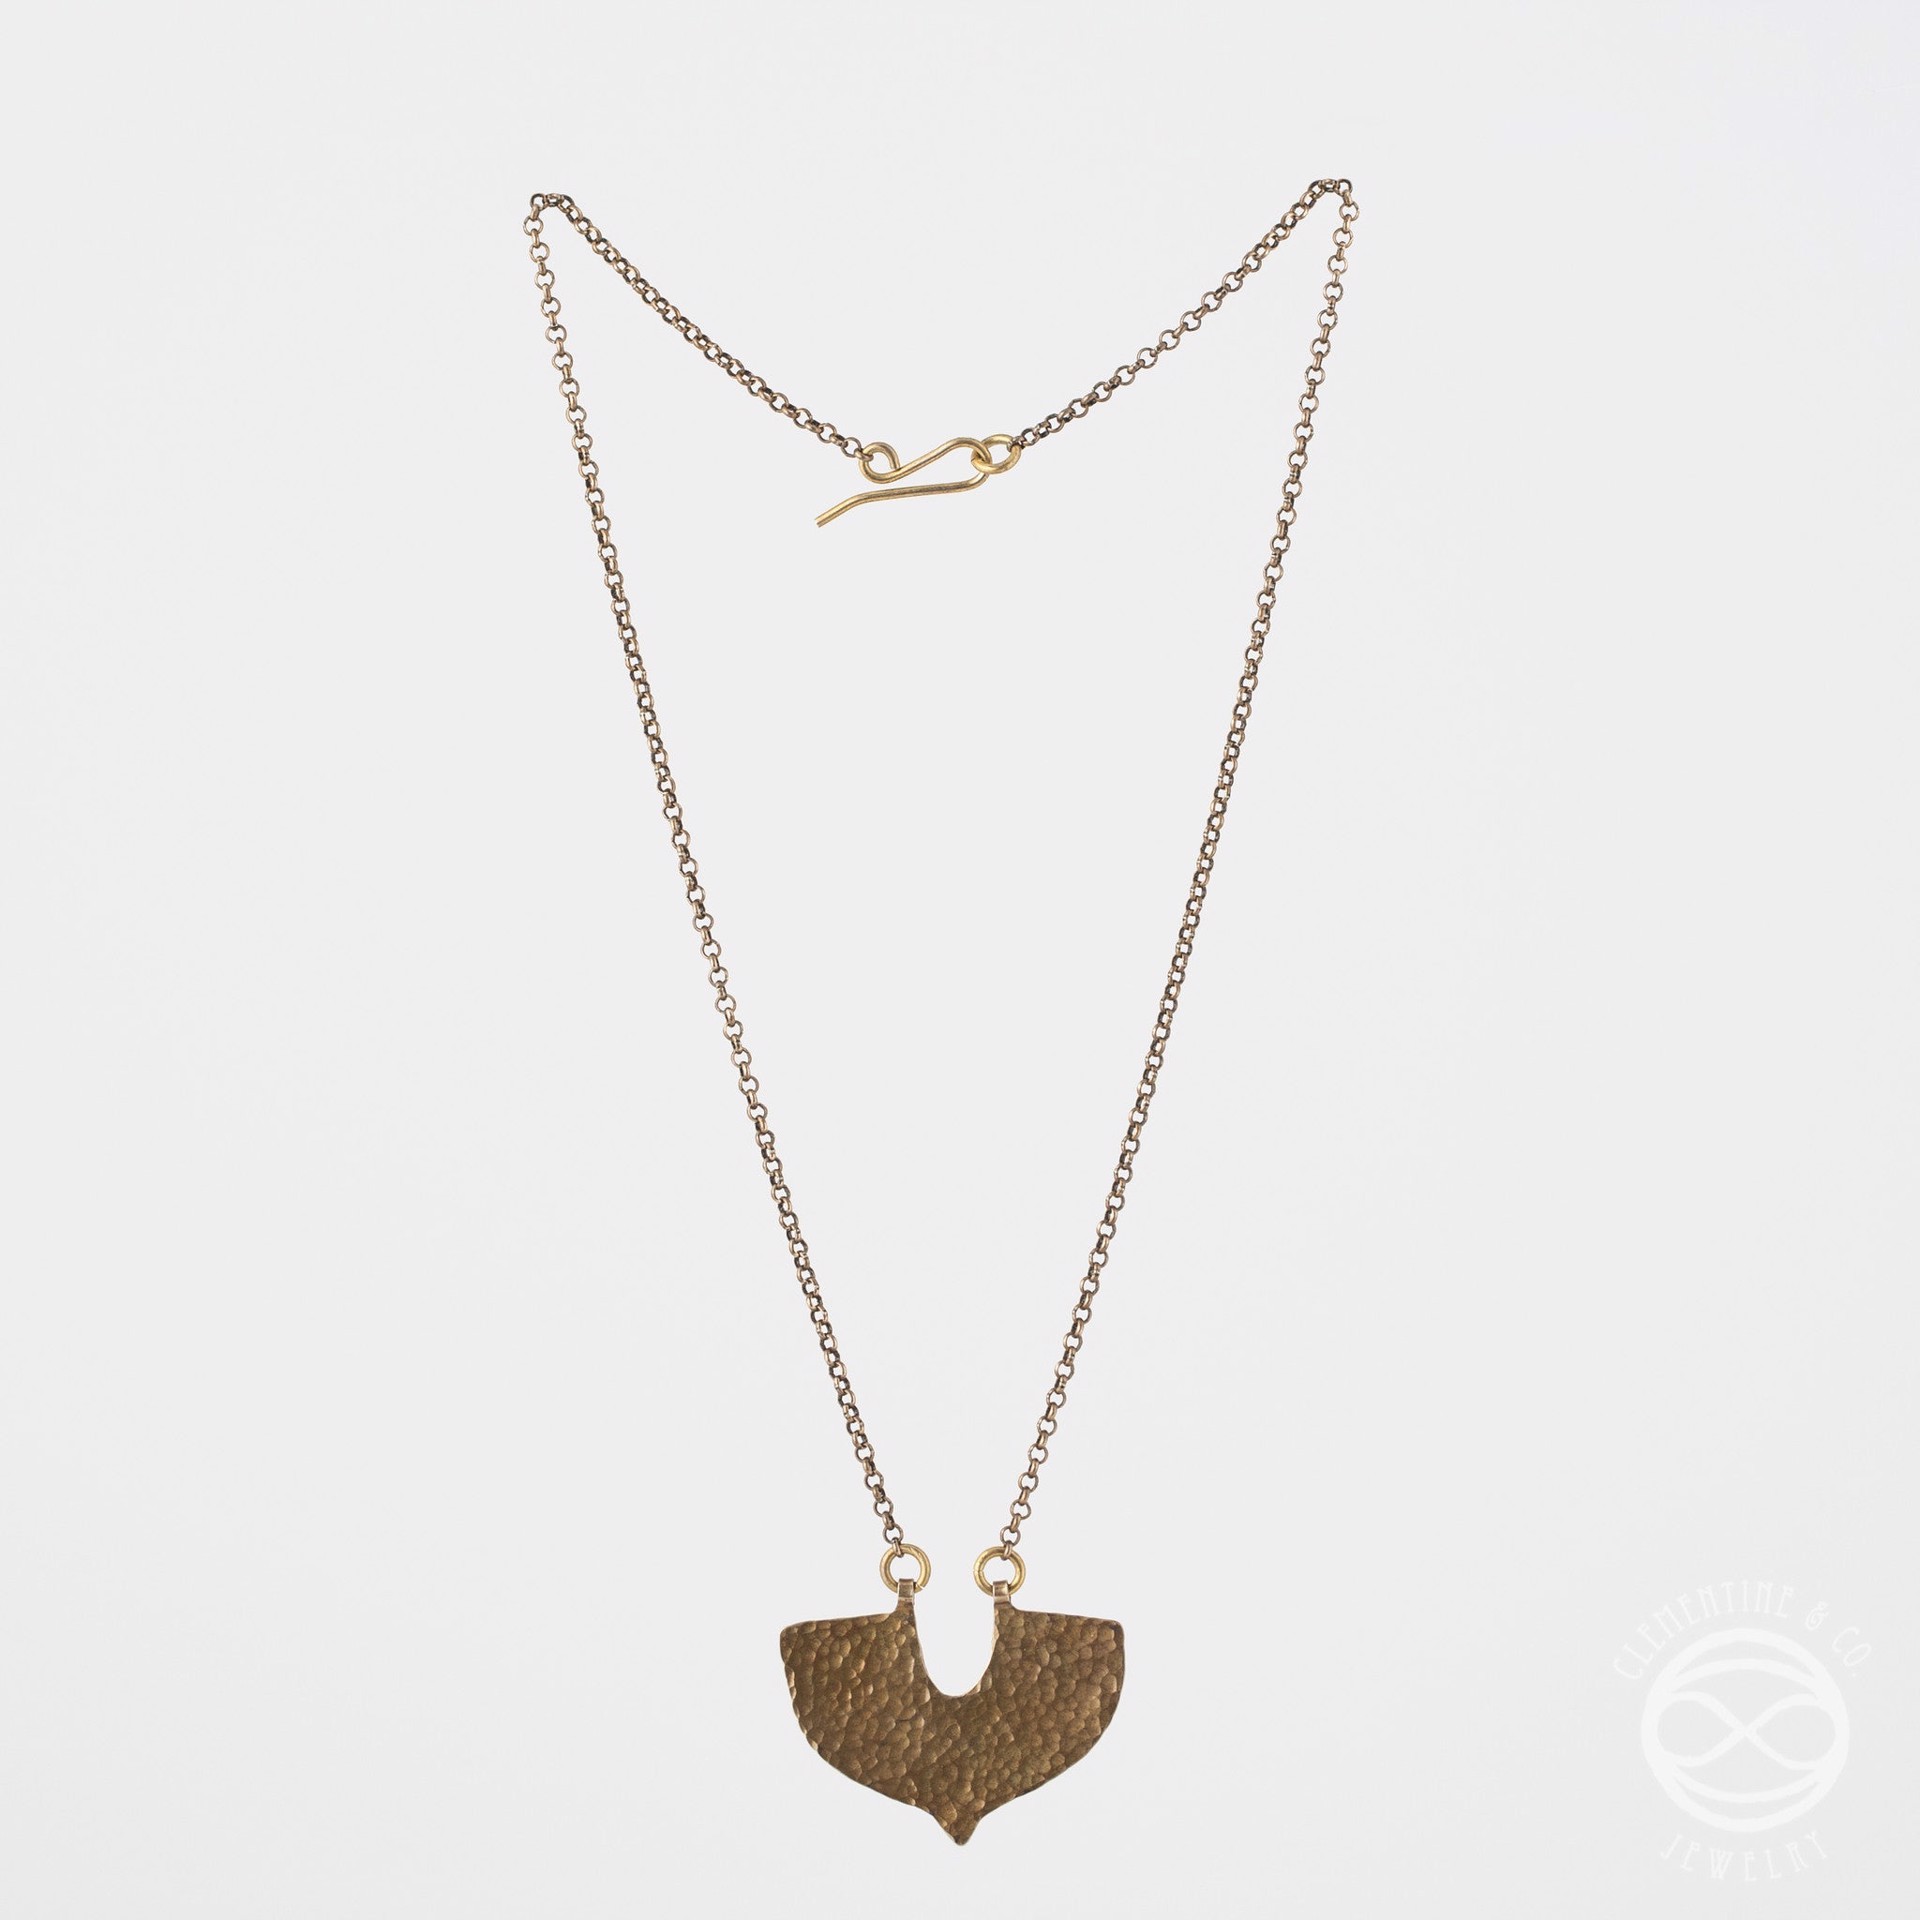 Shield Necklace in Antiqued Brass by Clementine & Co. Jewelry